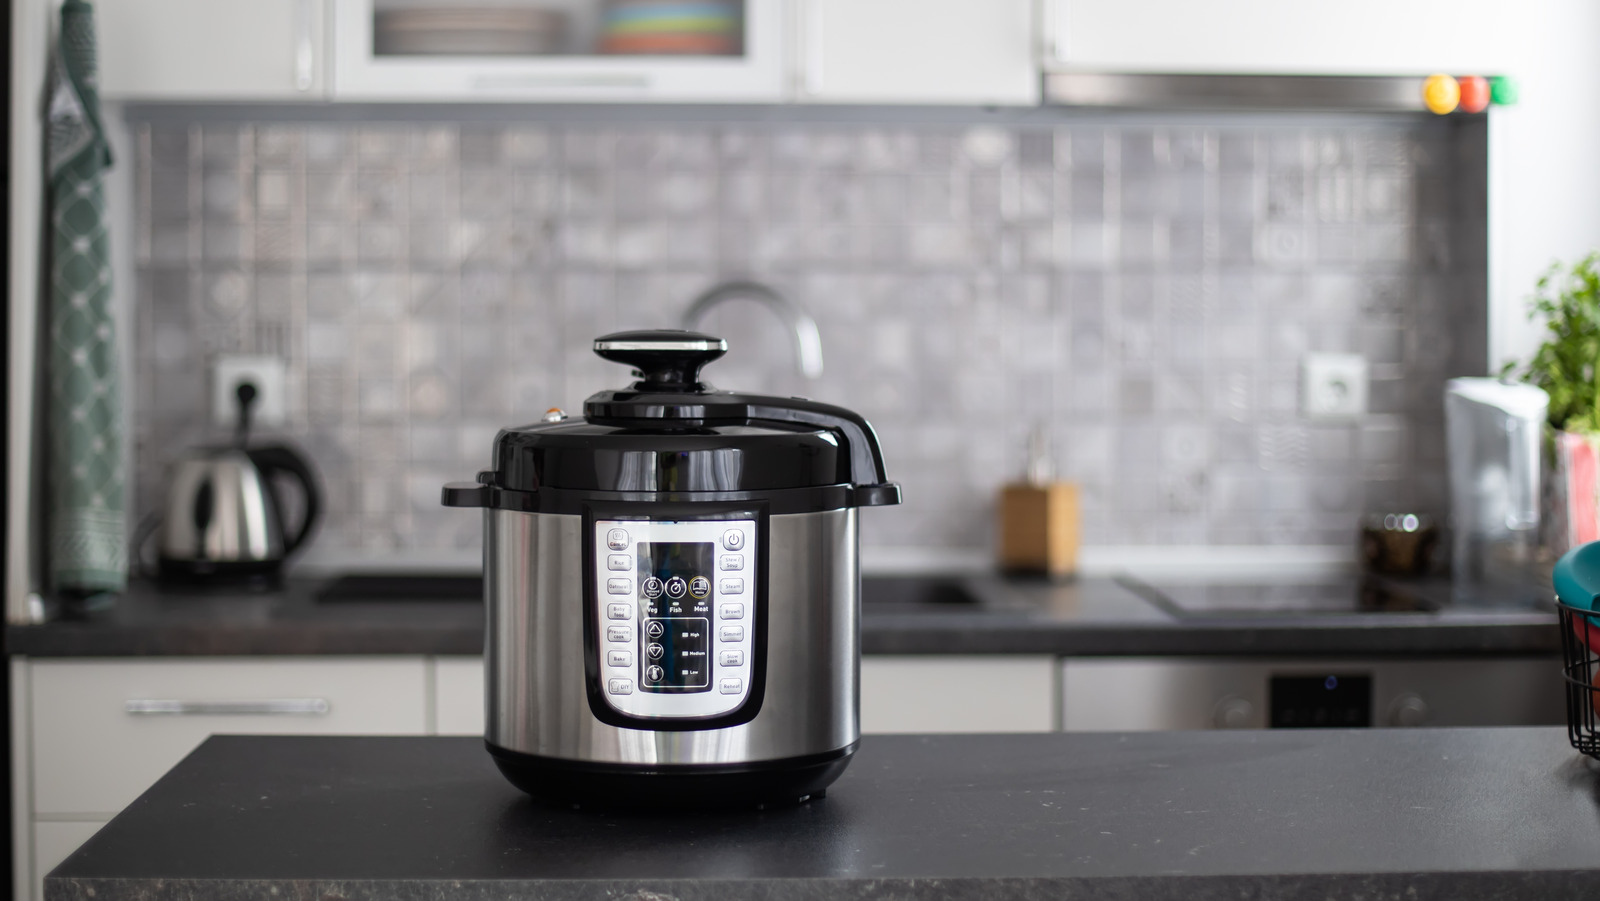 How to use an electric pressure cooker